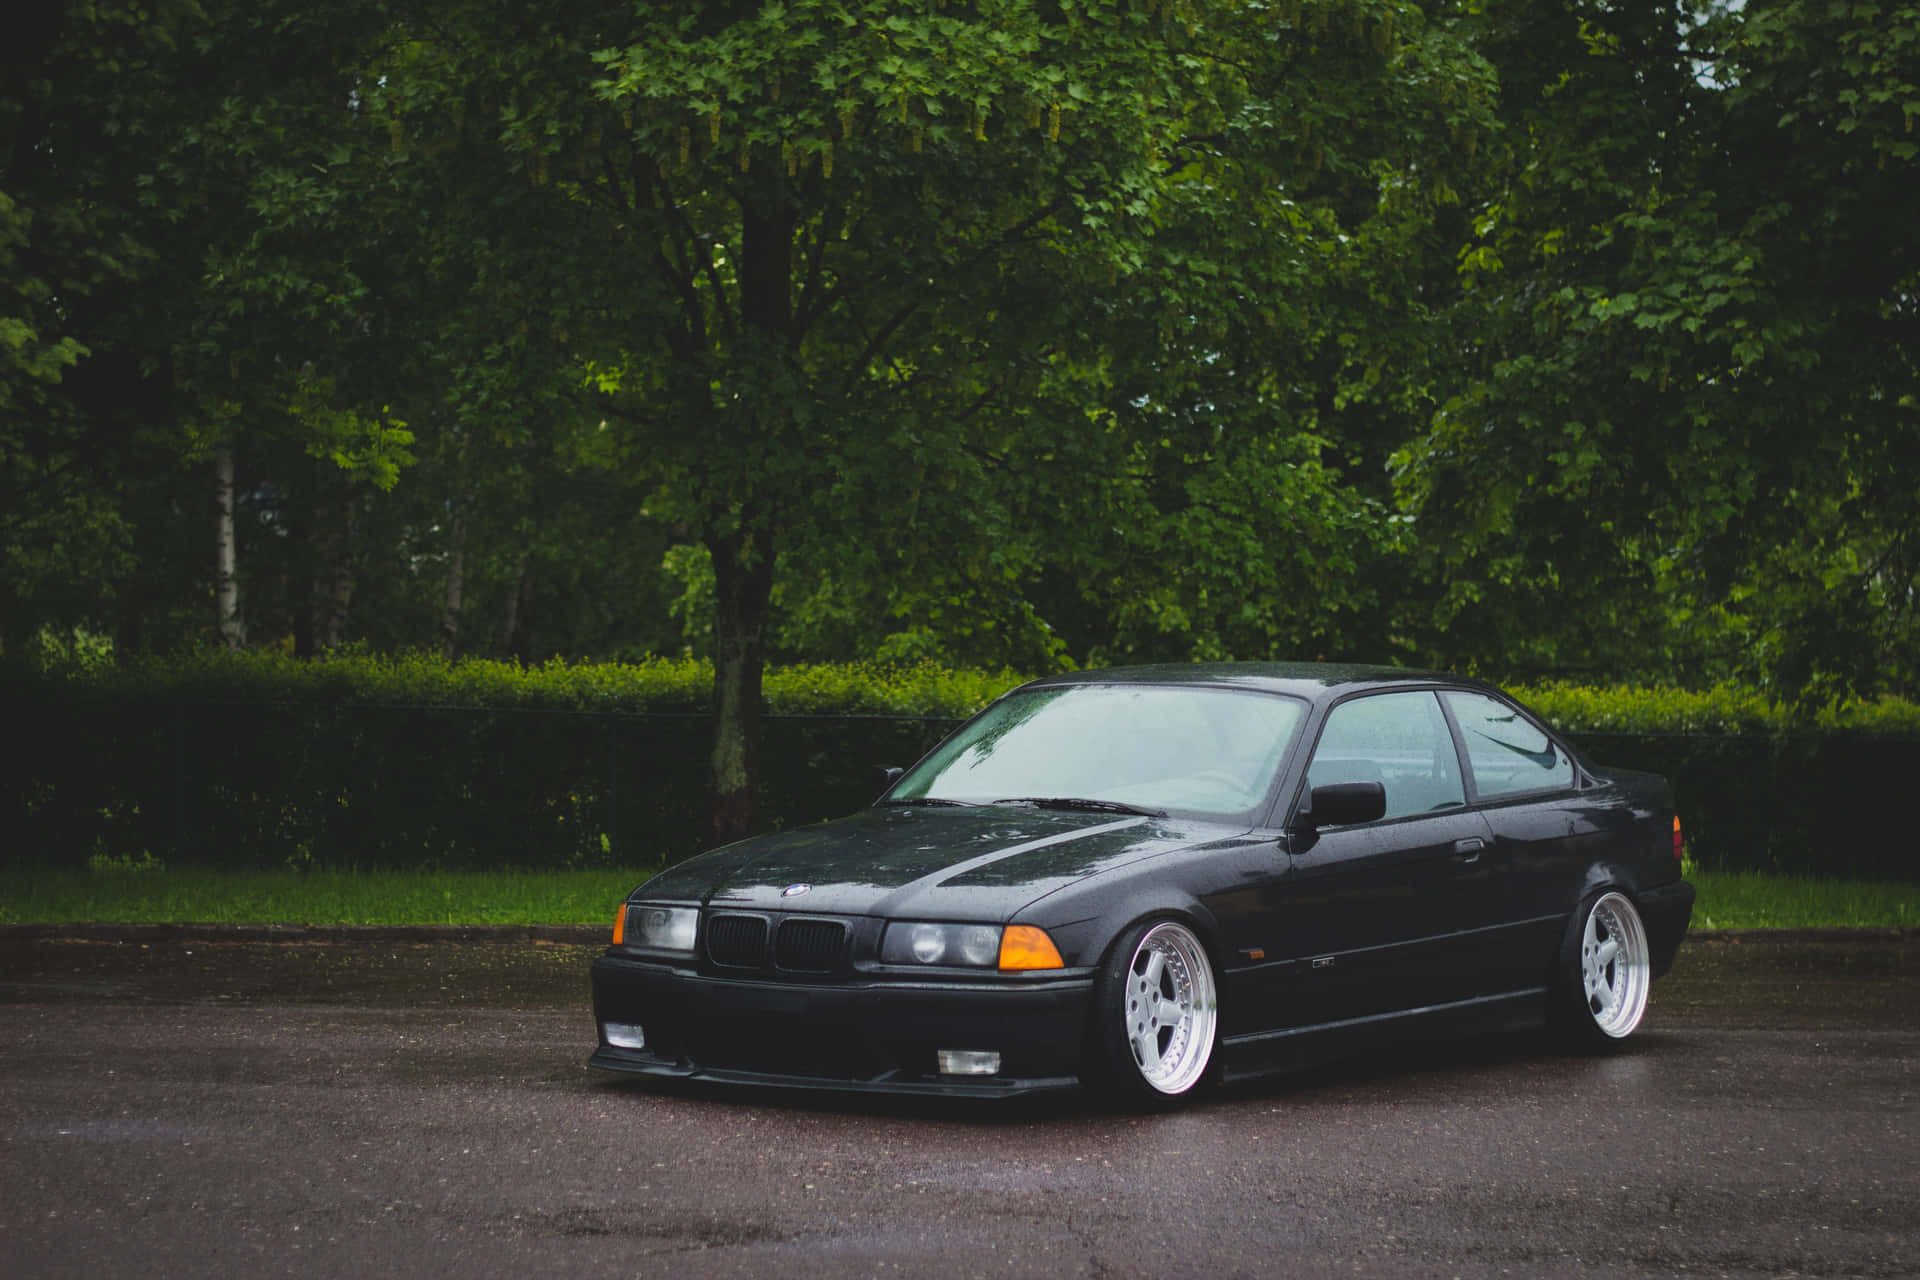 Black B M W E36 Coupe Parked Outdoors Wallpaper